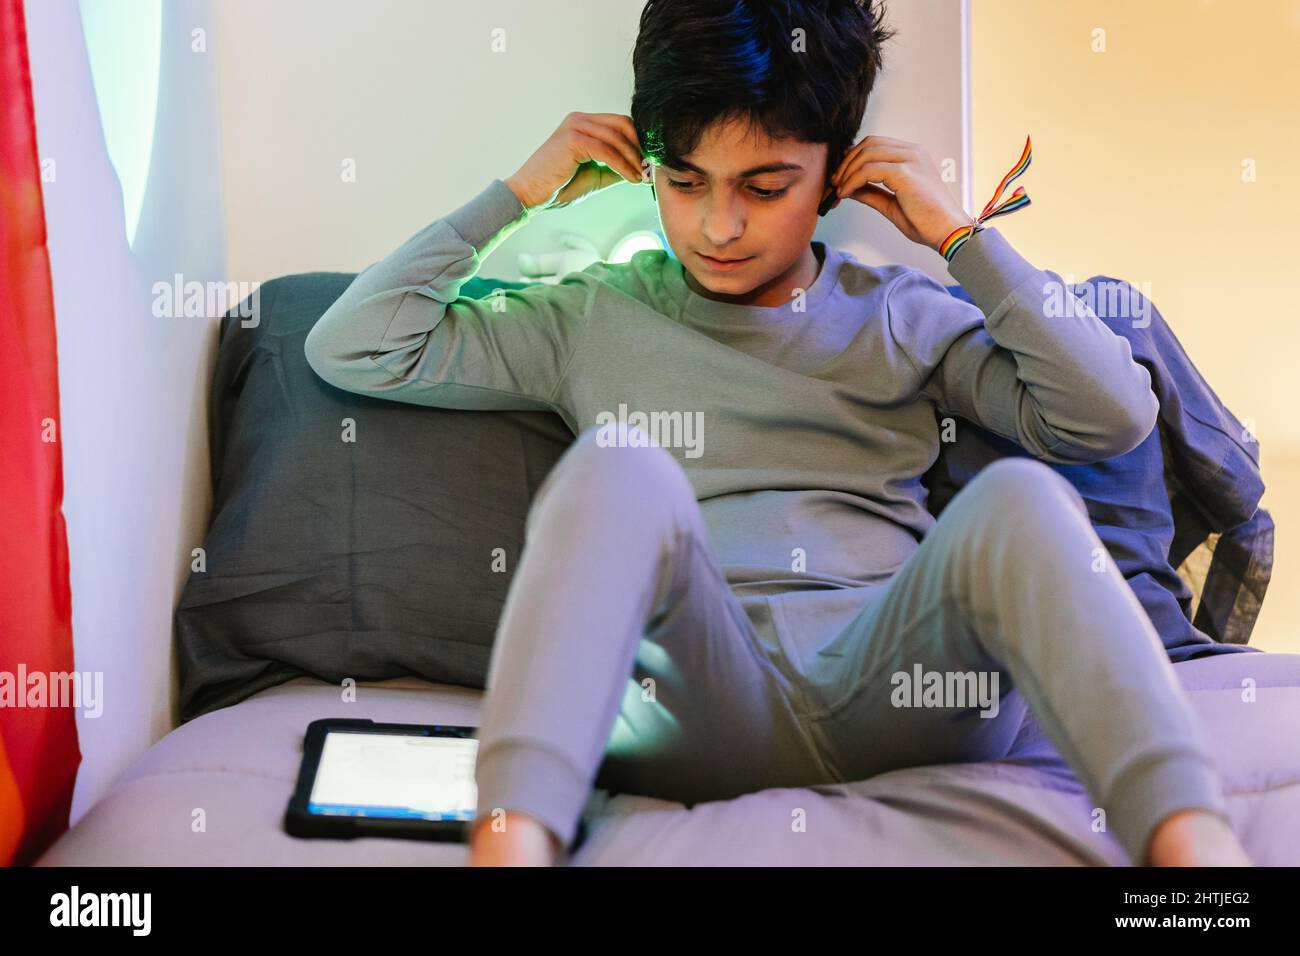 Arab teen boy with rainbow bracelet on wrist wearing pajama adjusting wireless earphones while sitting on bed and using tablet Stock Photo